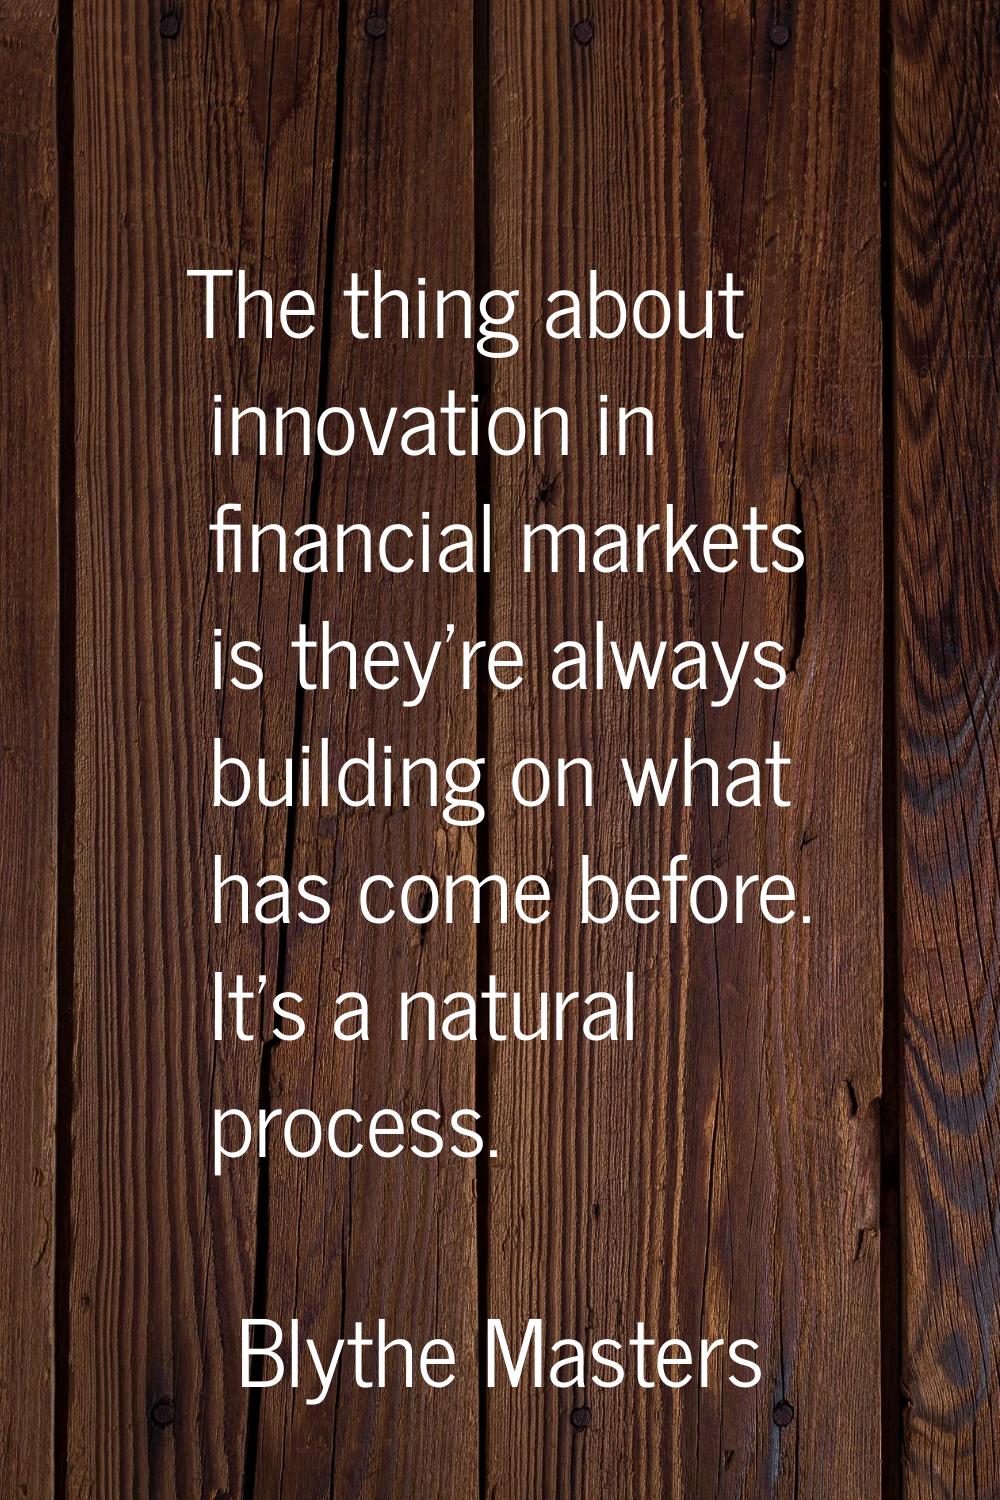 The thing about innovation in financial markets is they're always building on what has come before.